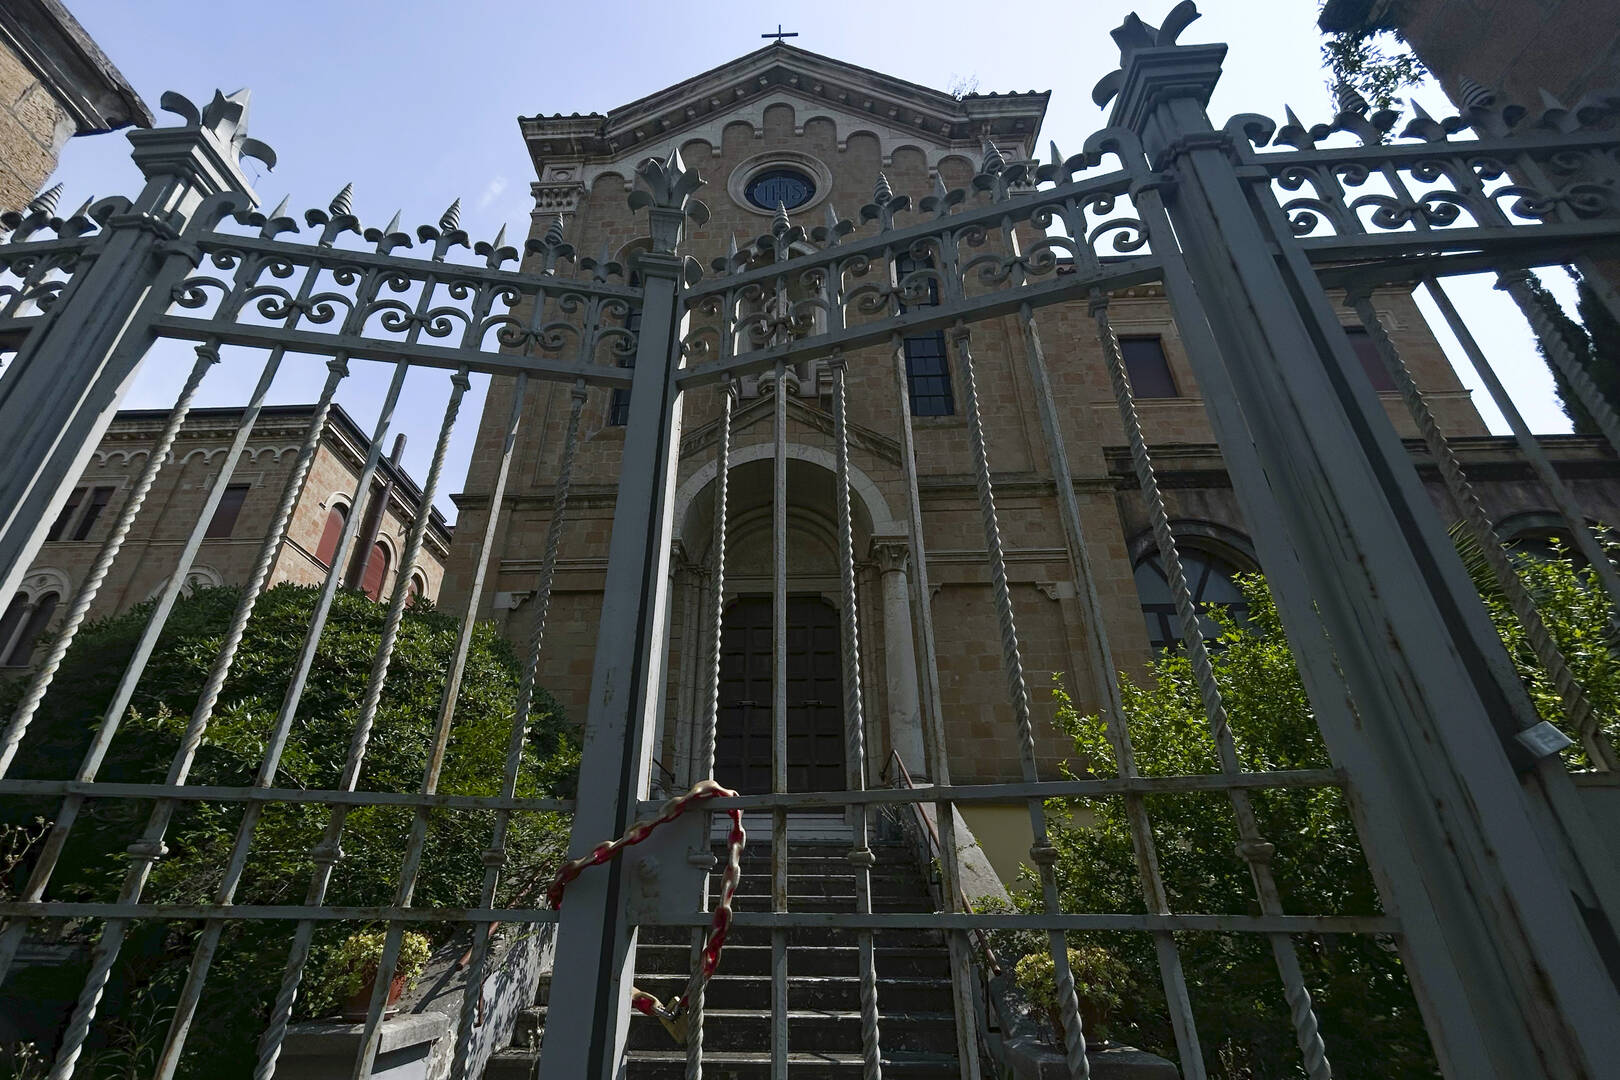 view of a monastery in rome with a fence in front of it